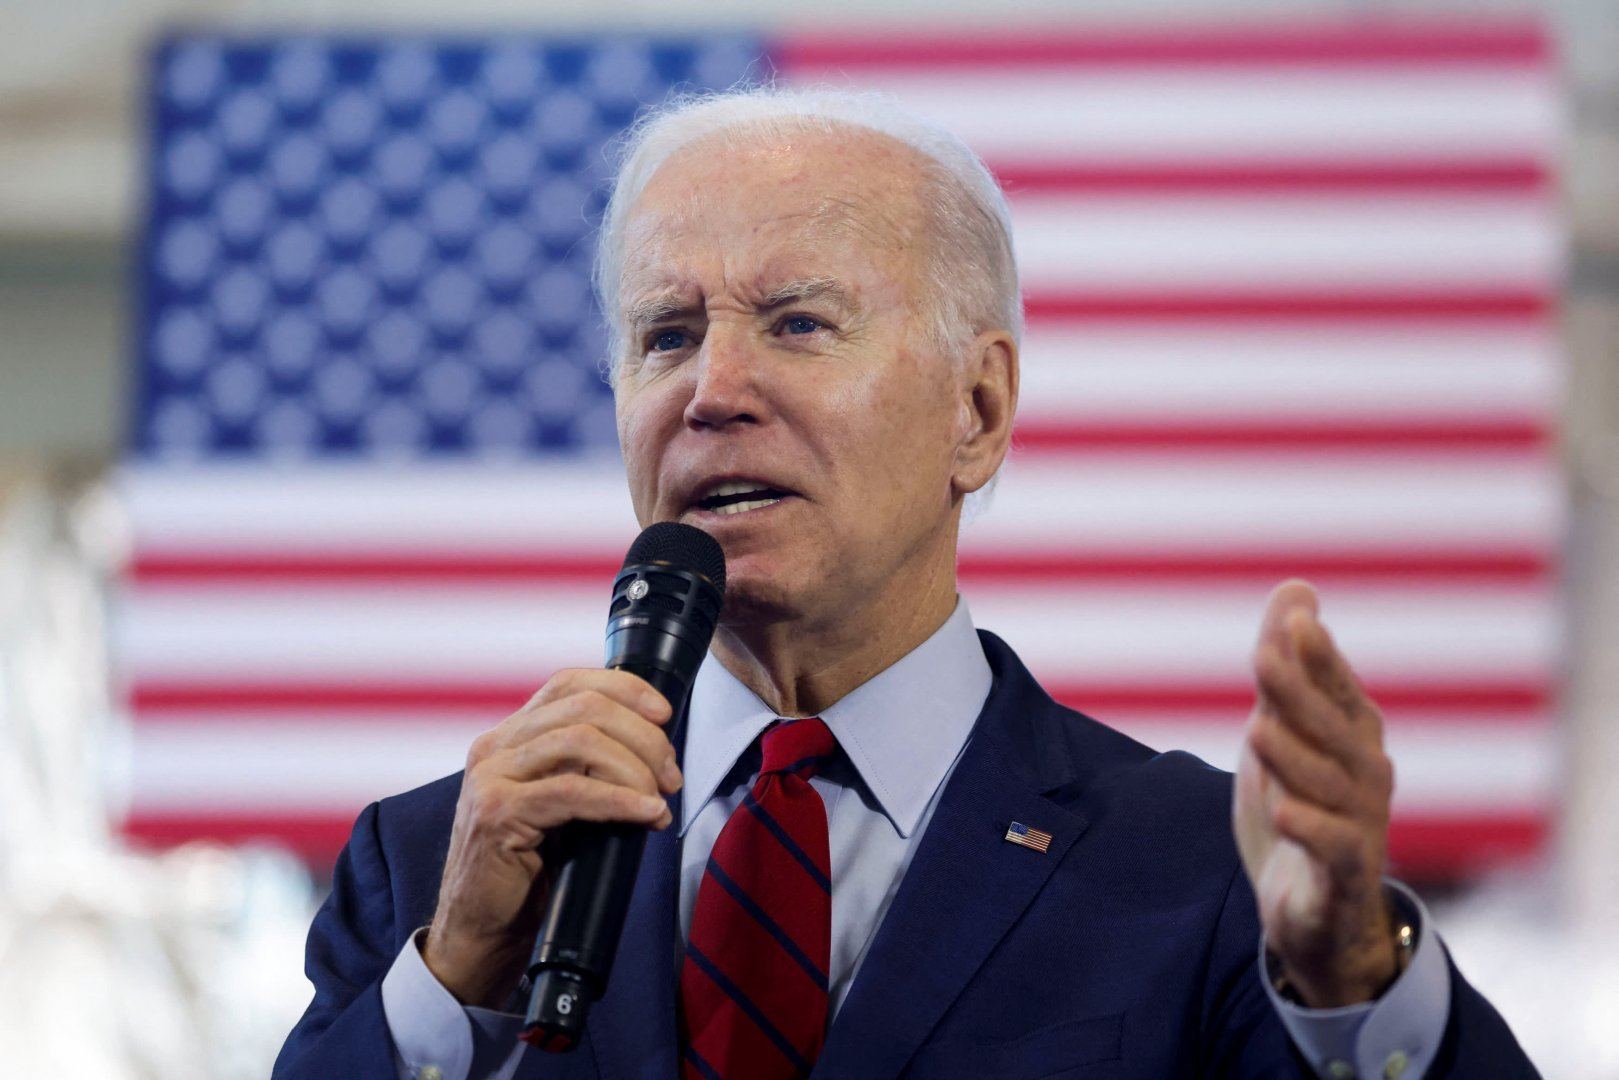 Biden promised to eliminate chemical weapons stockpiles in country by fall